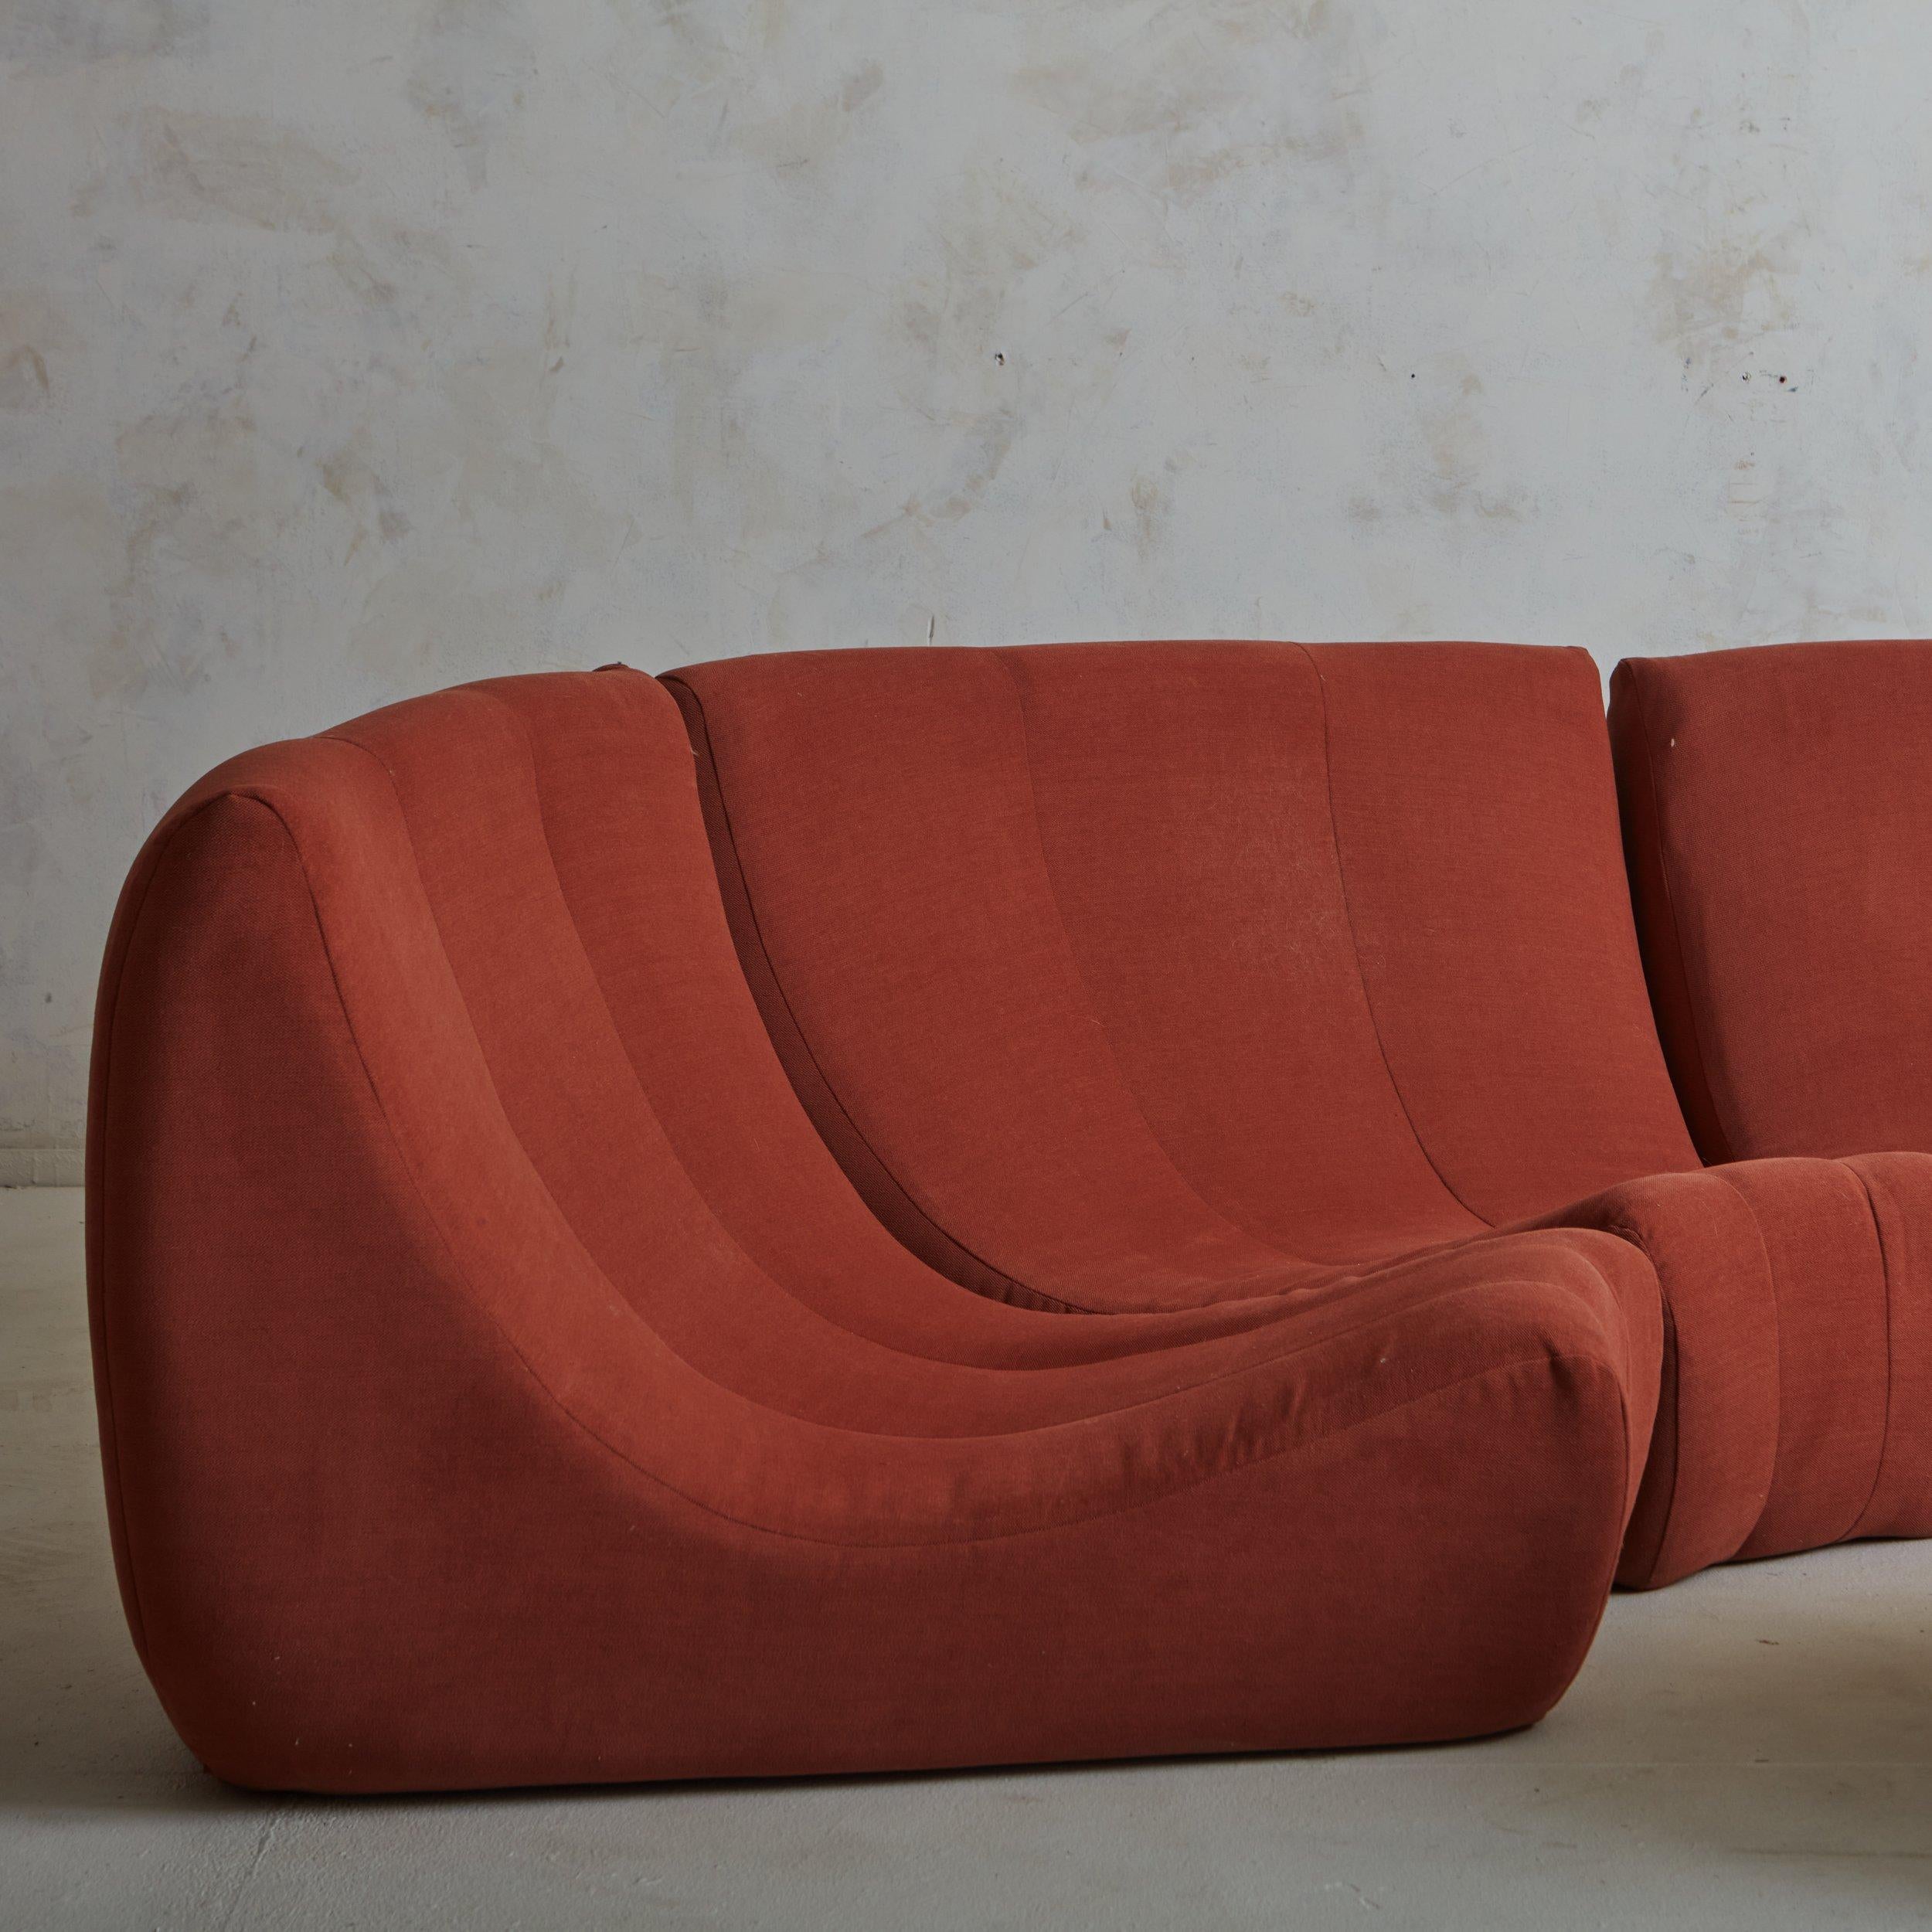 French 3-Piece 'Gilda' Sofa with Ottoman by Michel Ducaroy for Ligne Roset, France 1972 For Sale